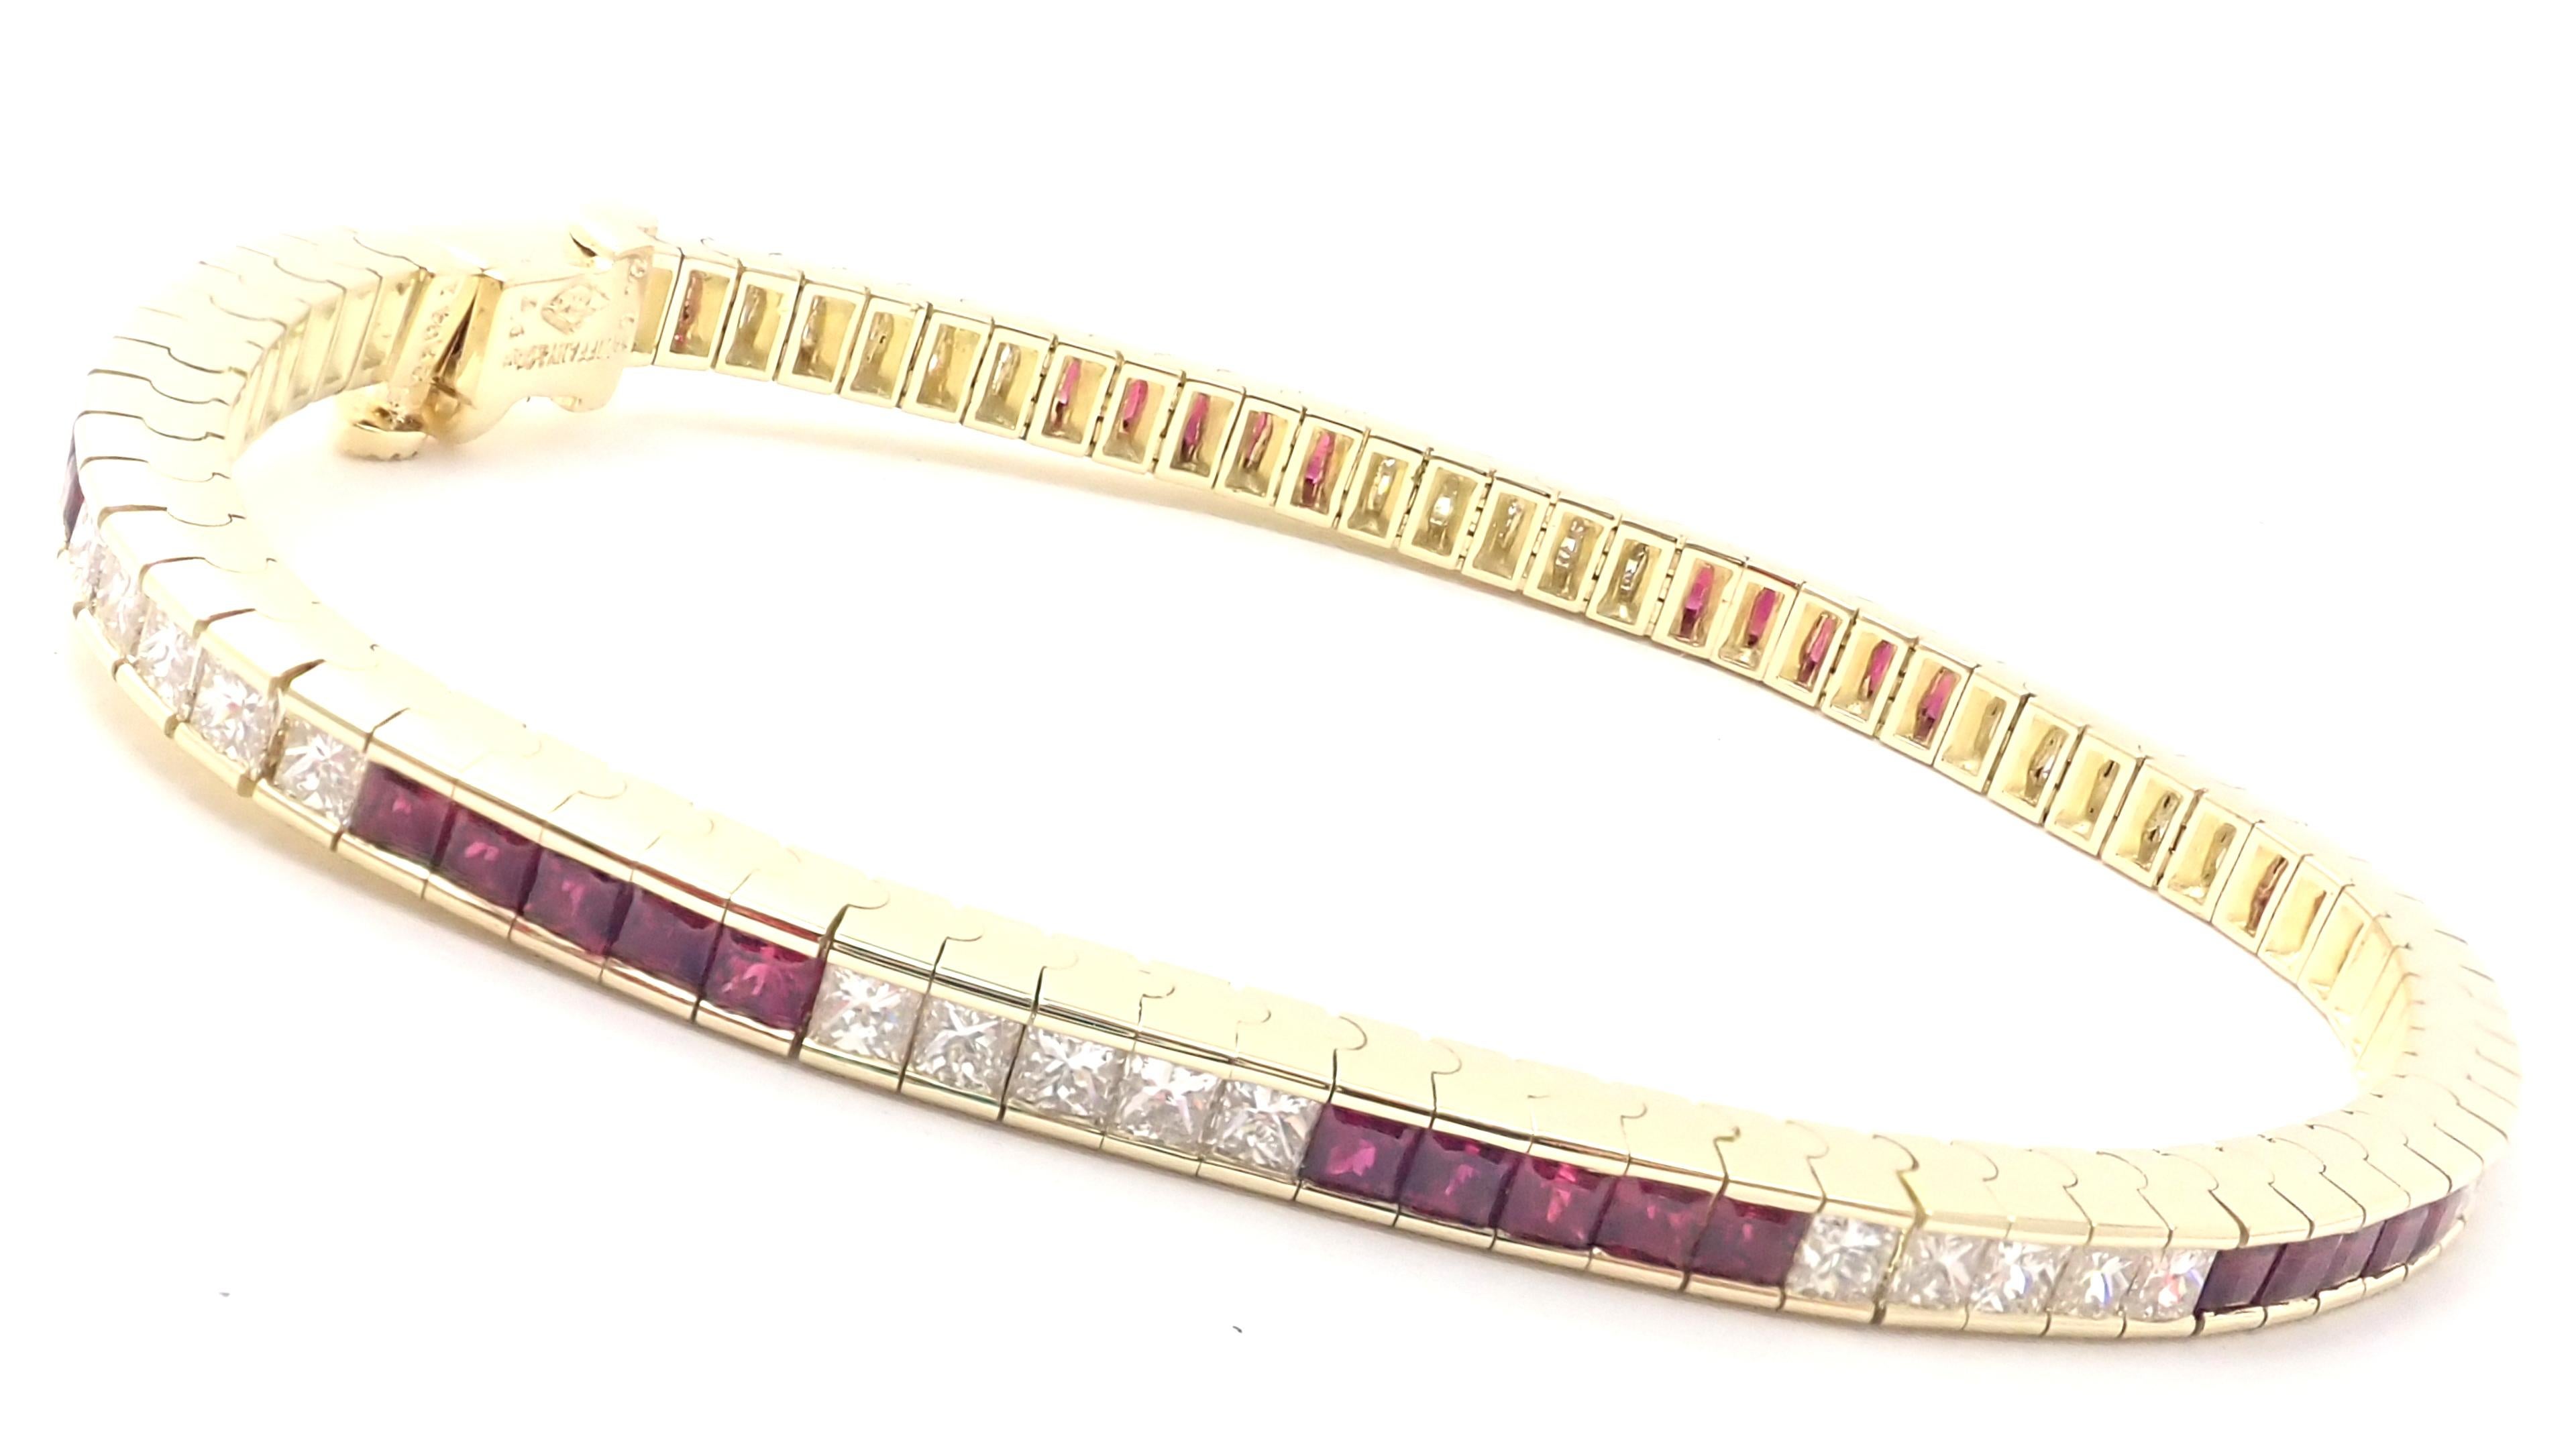 18k Yellow Gold Diamond And Ruby Line Tennis Bracelet by Tiffany & Co.
With 40 quadrillion cut diamonds VS1 clarity, G color total weight 2.85ct
40 square cut rubies total weight approximately 3.66ct
Details: 
Length: 7